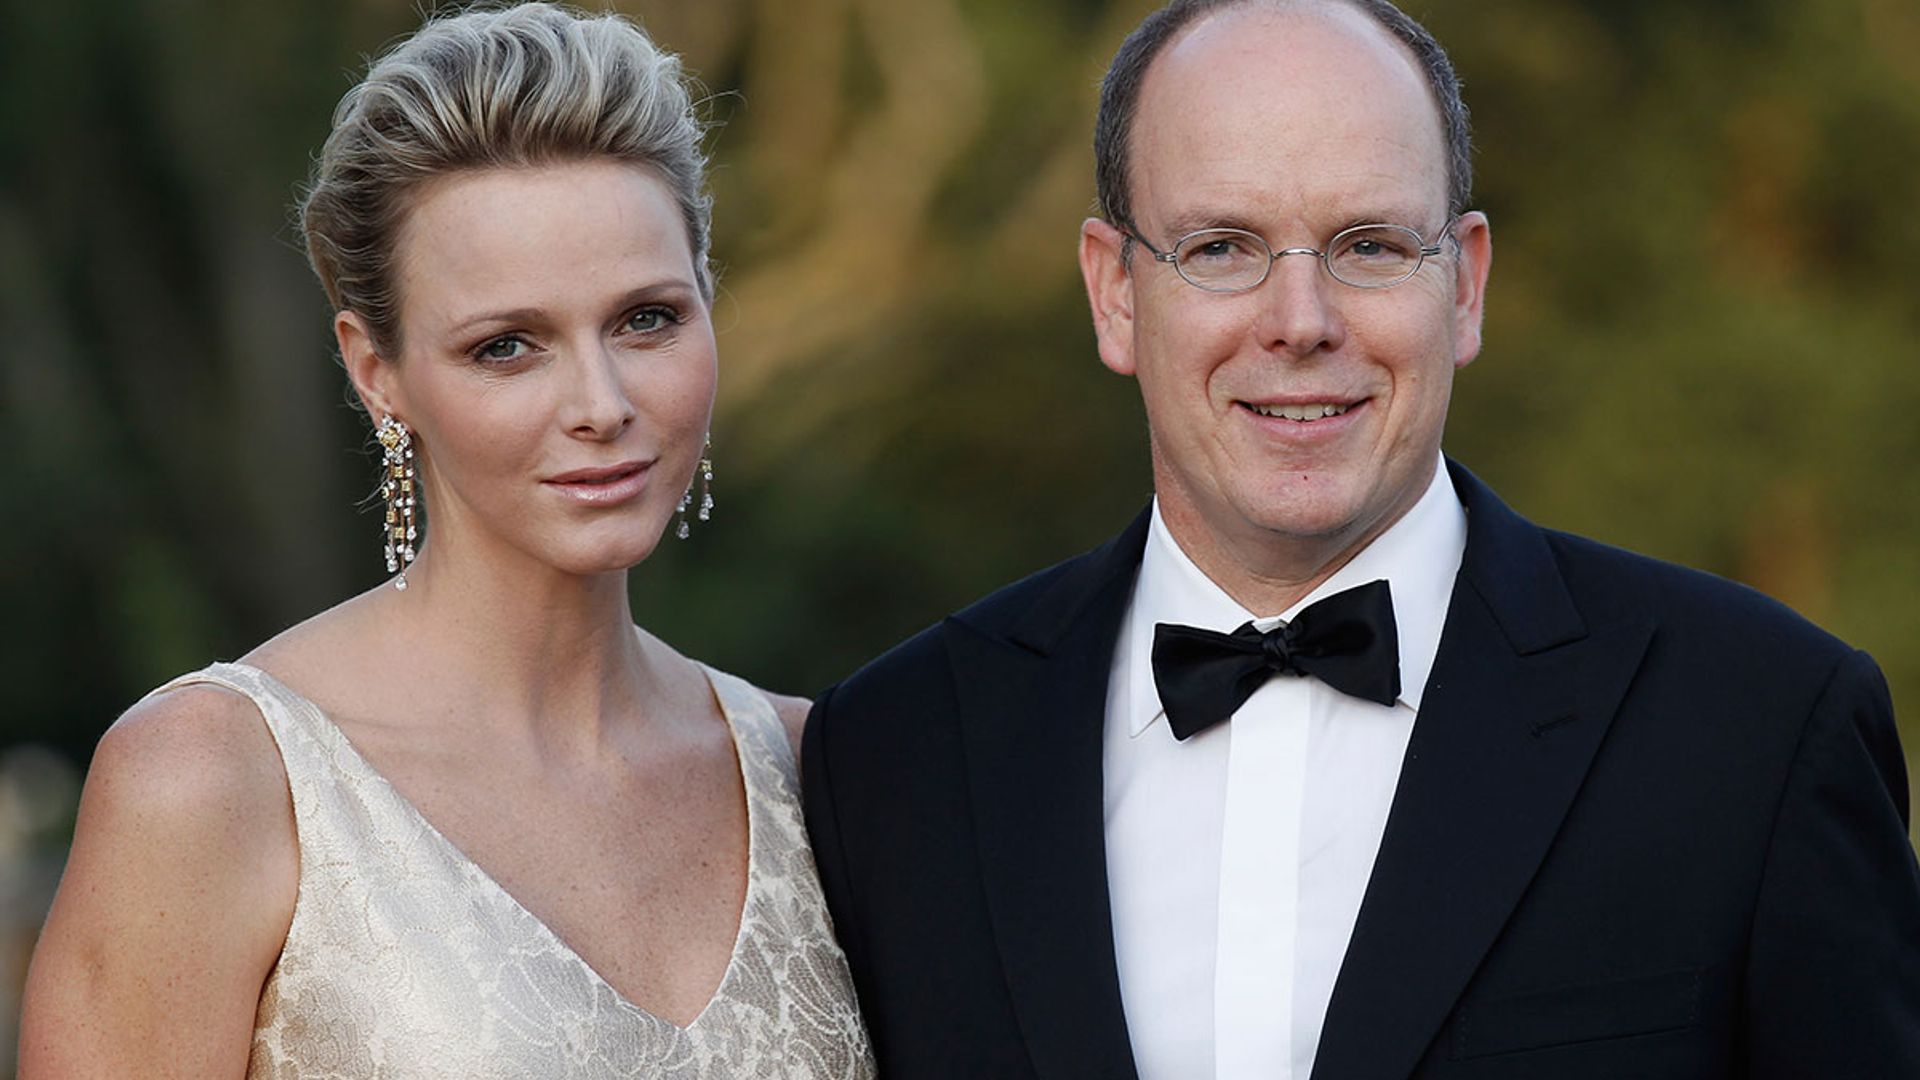 Princess Charlene of Monaco cosies up to Prince Albert in loved-up photos